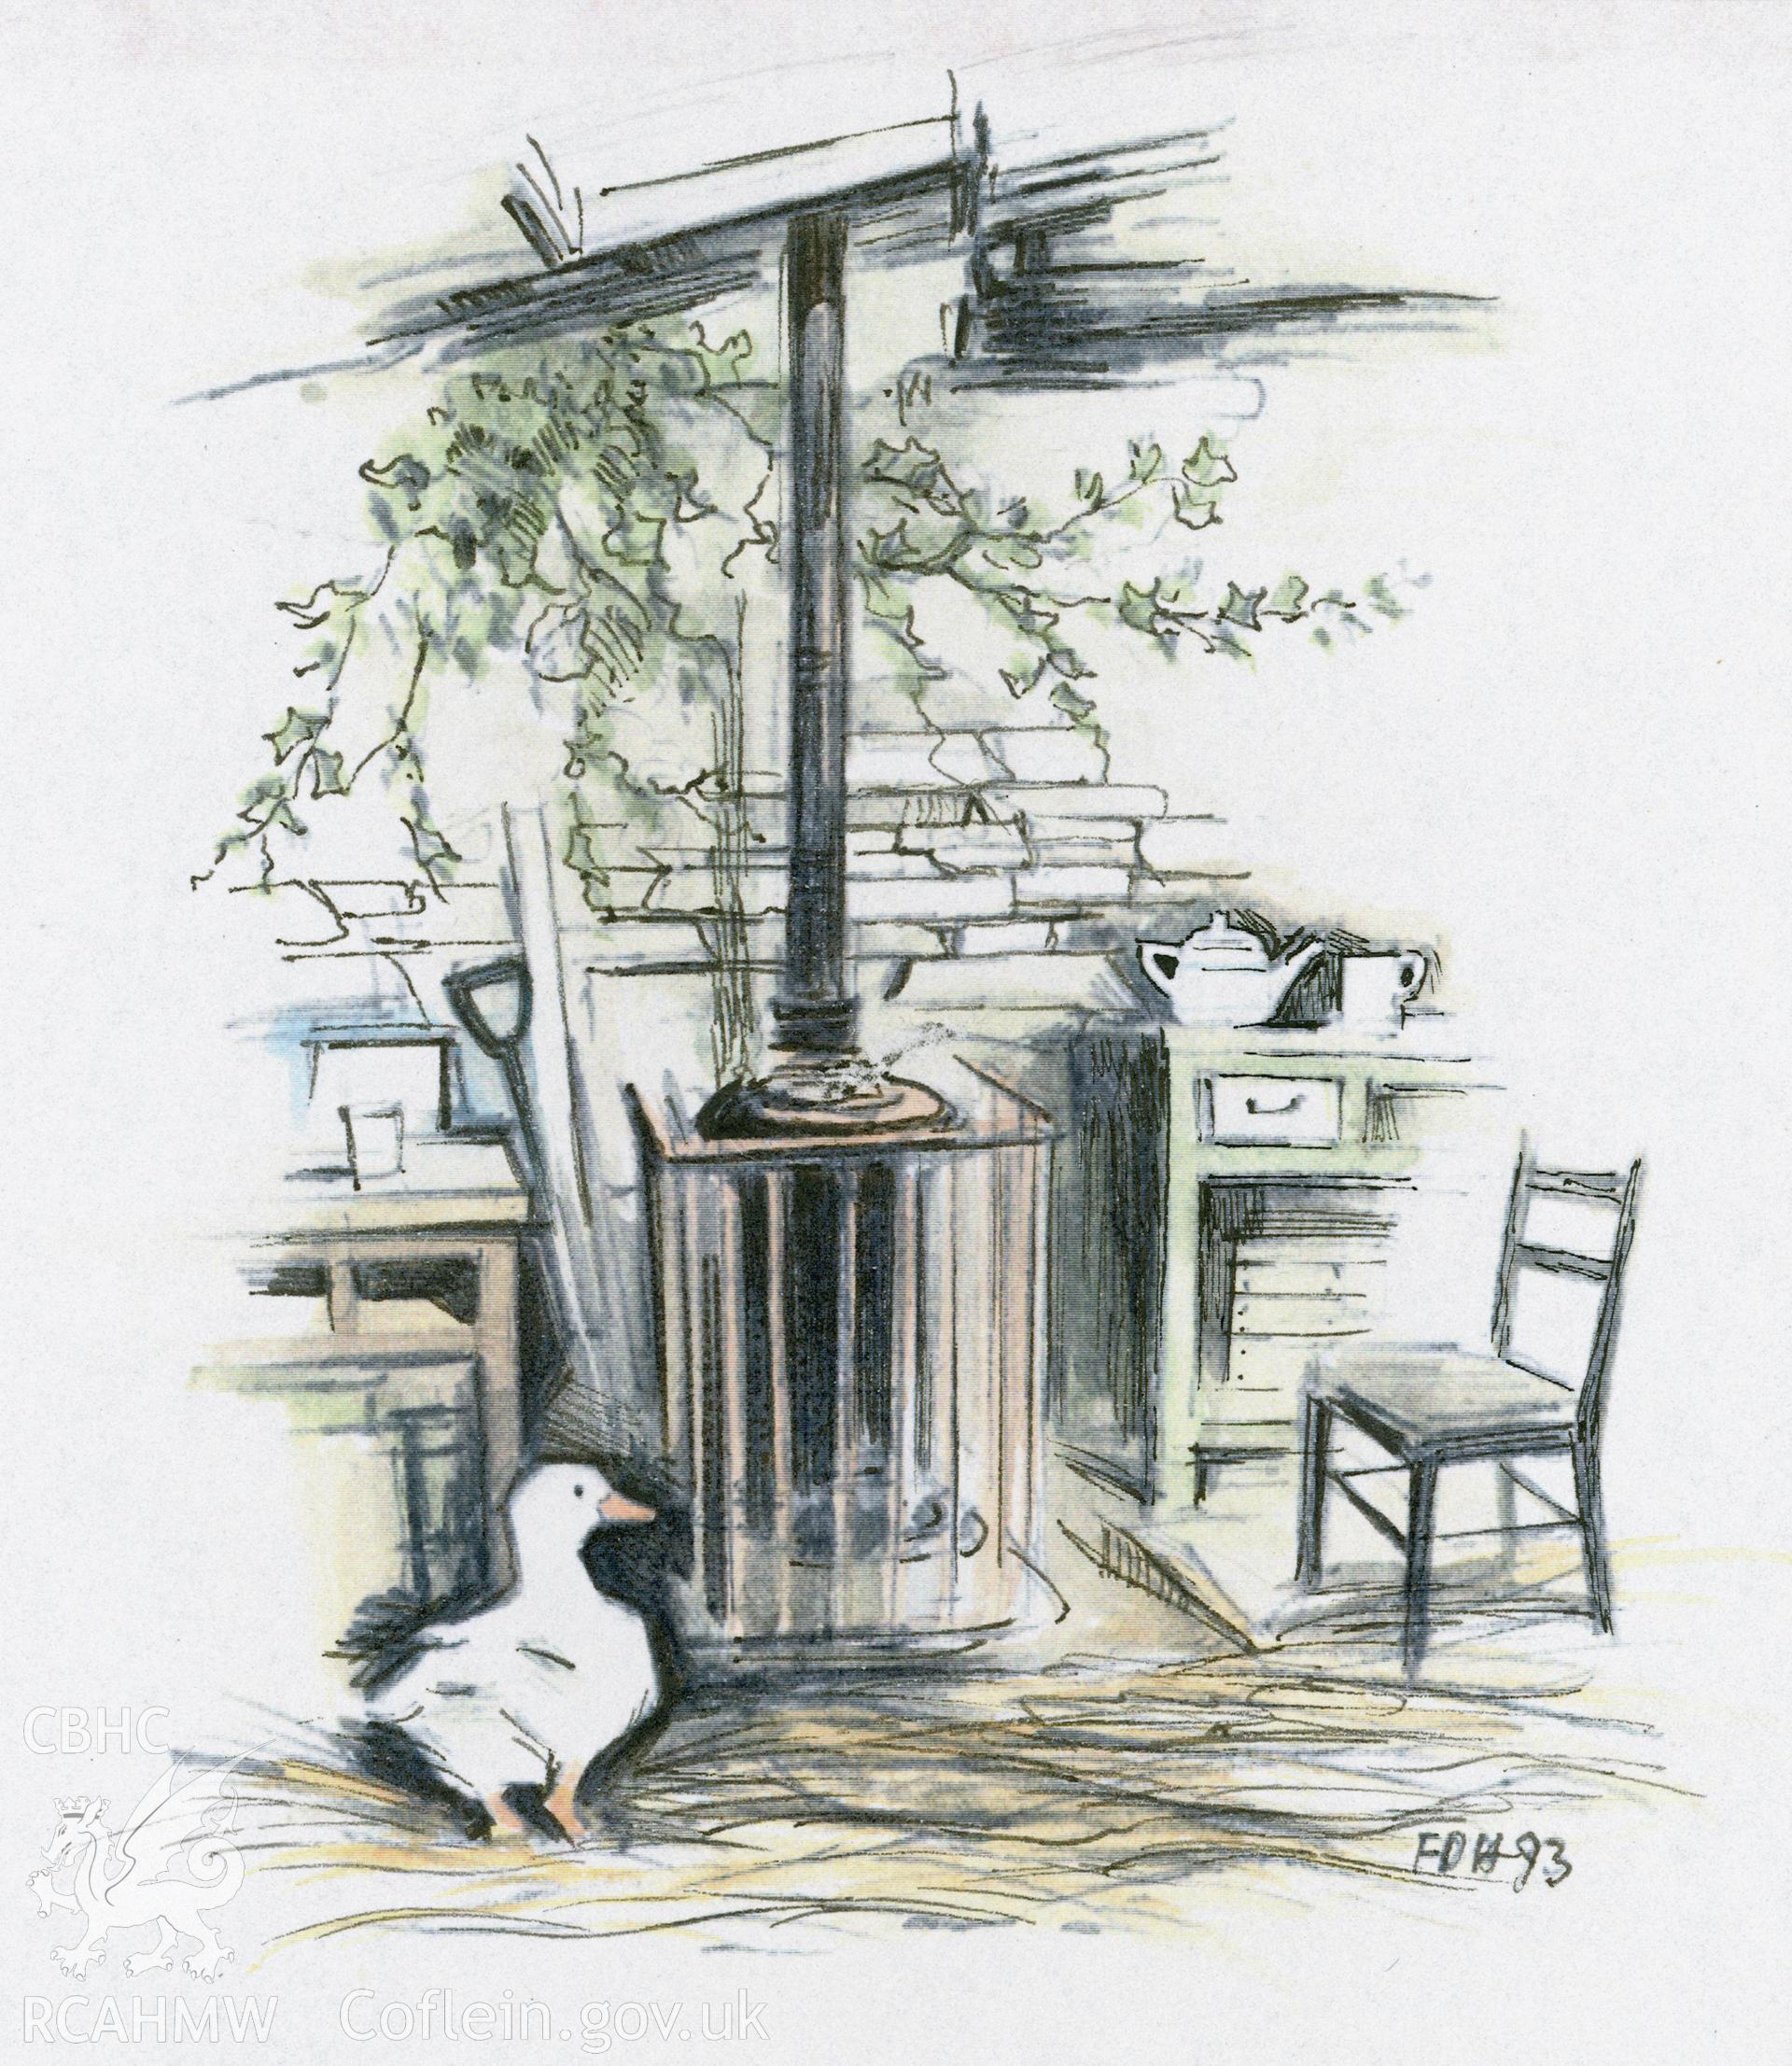 Steiner School - Gardening Shed with Duck: (pencil and watercolour) drawing.